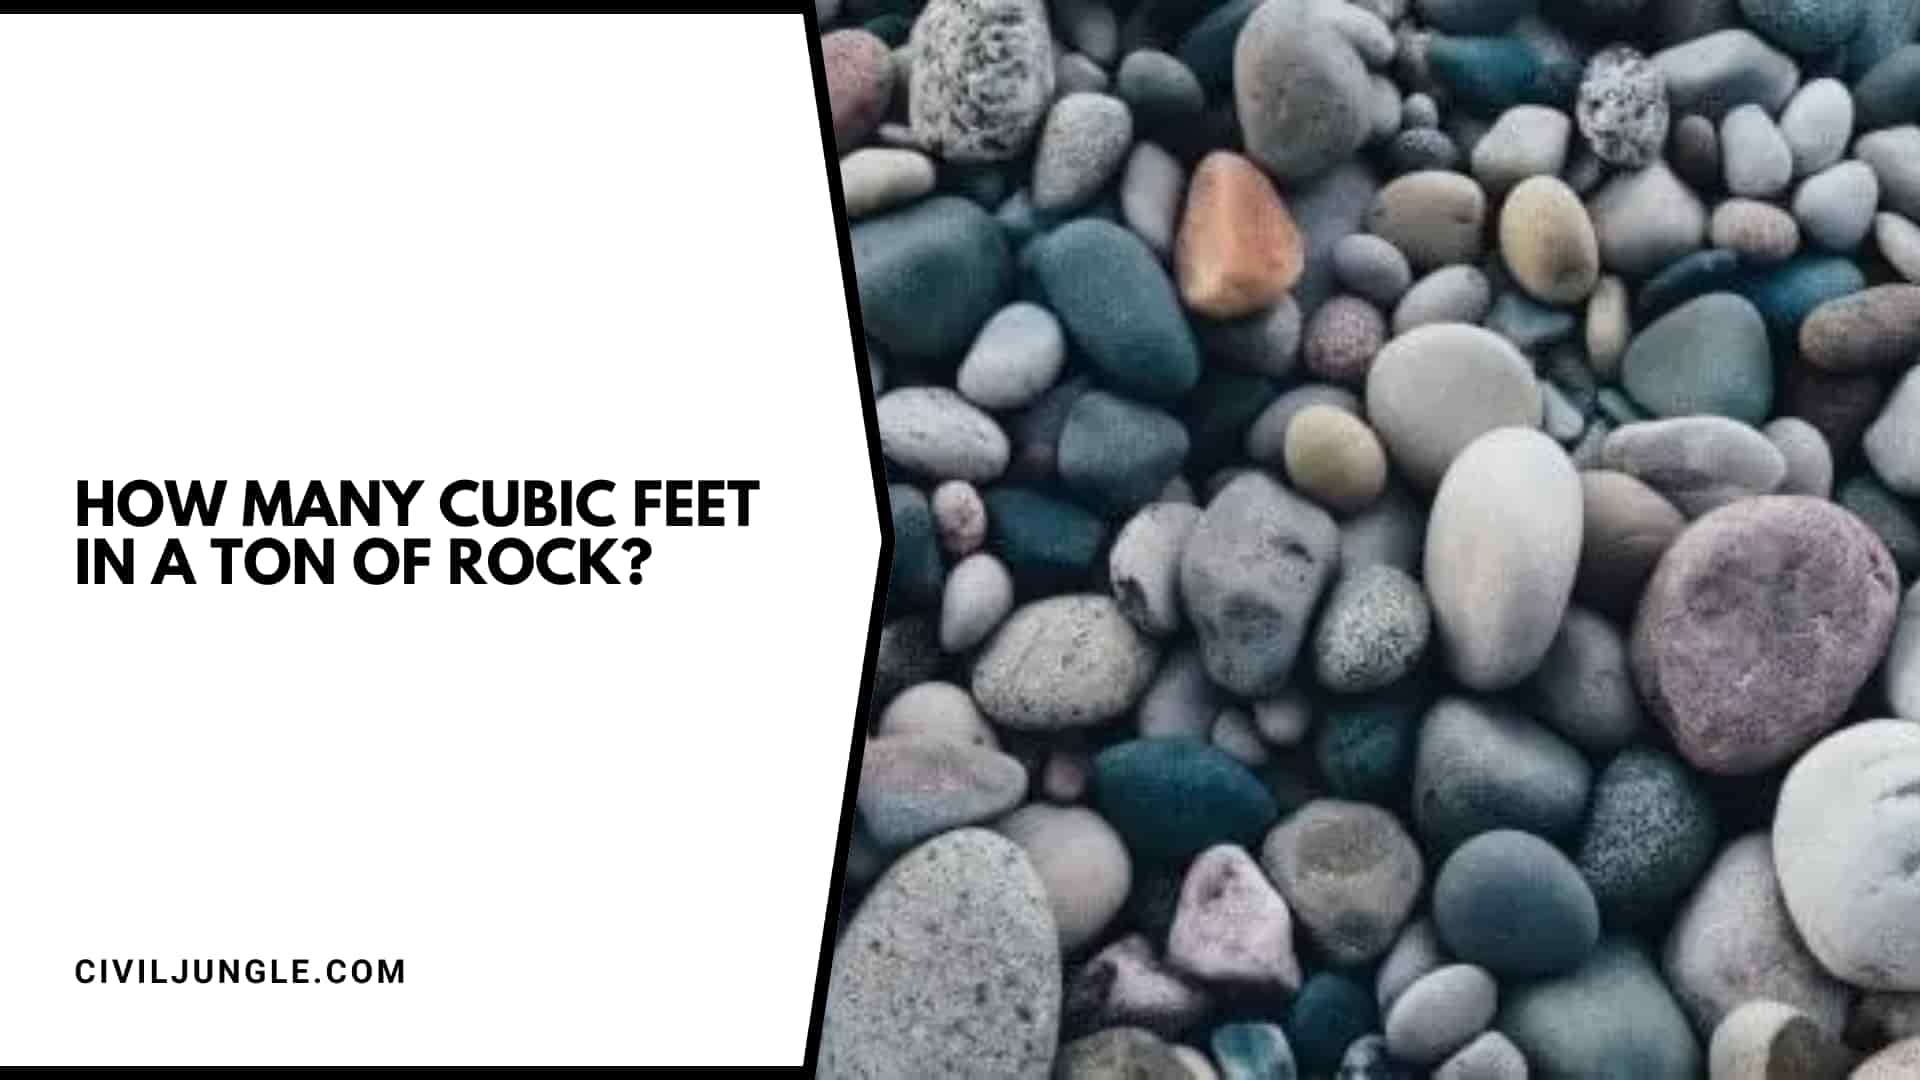 How Many Cubic Feet in a Ton of Rock?